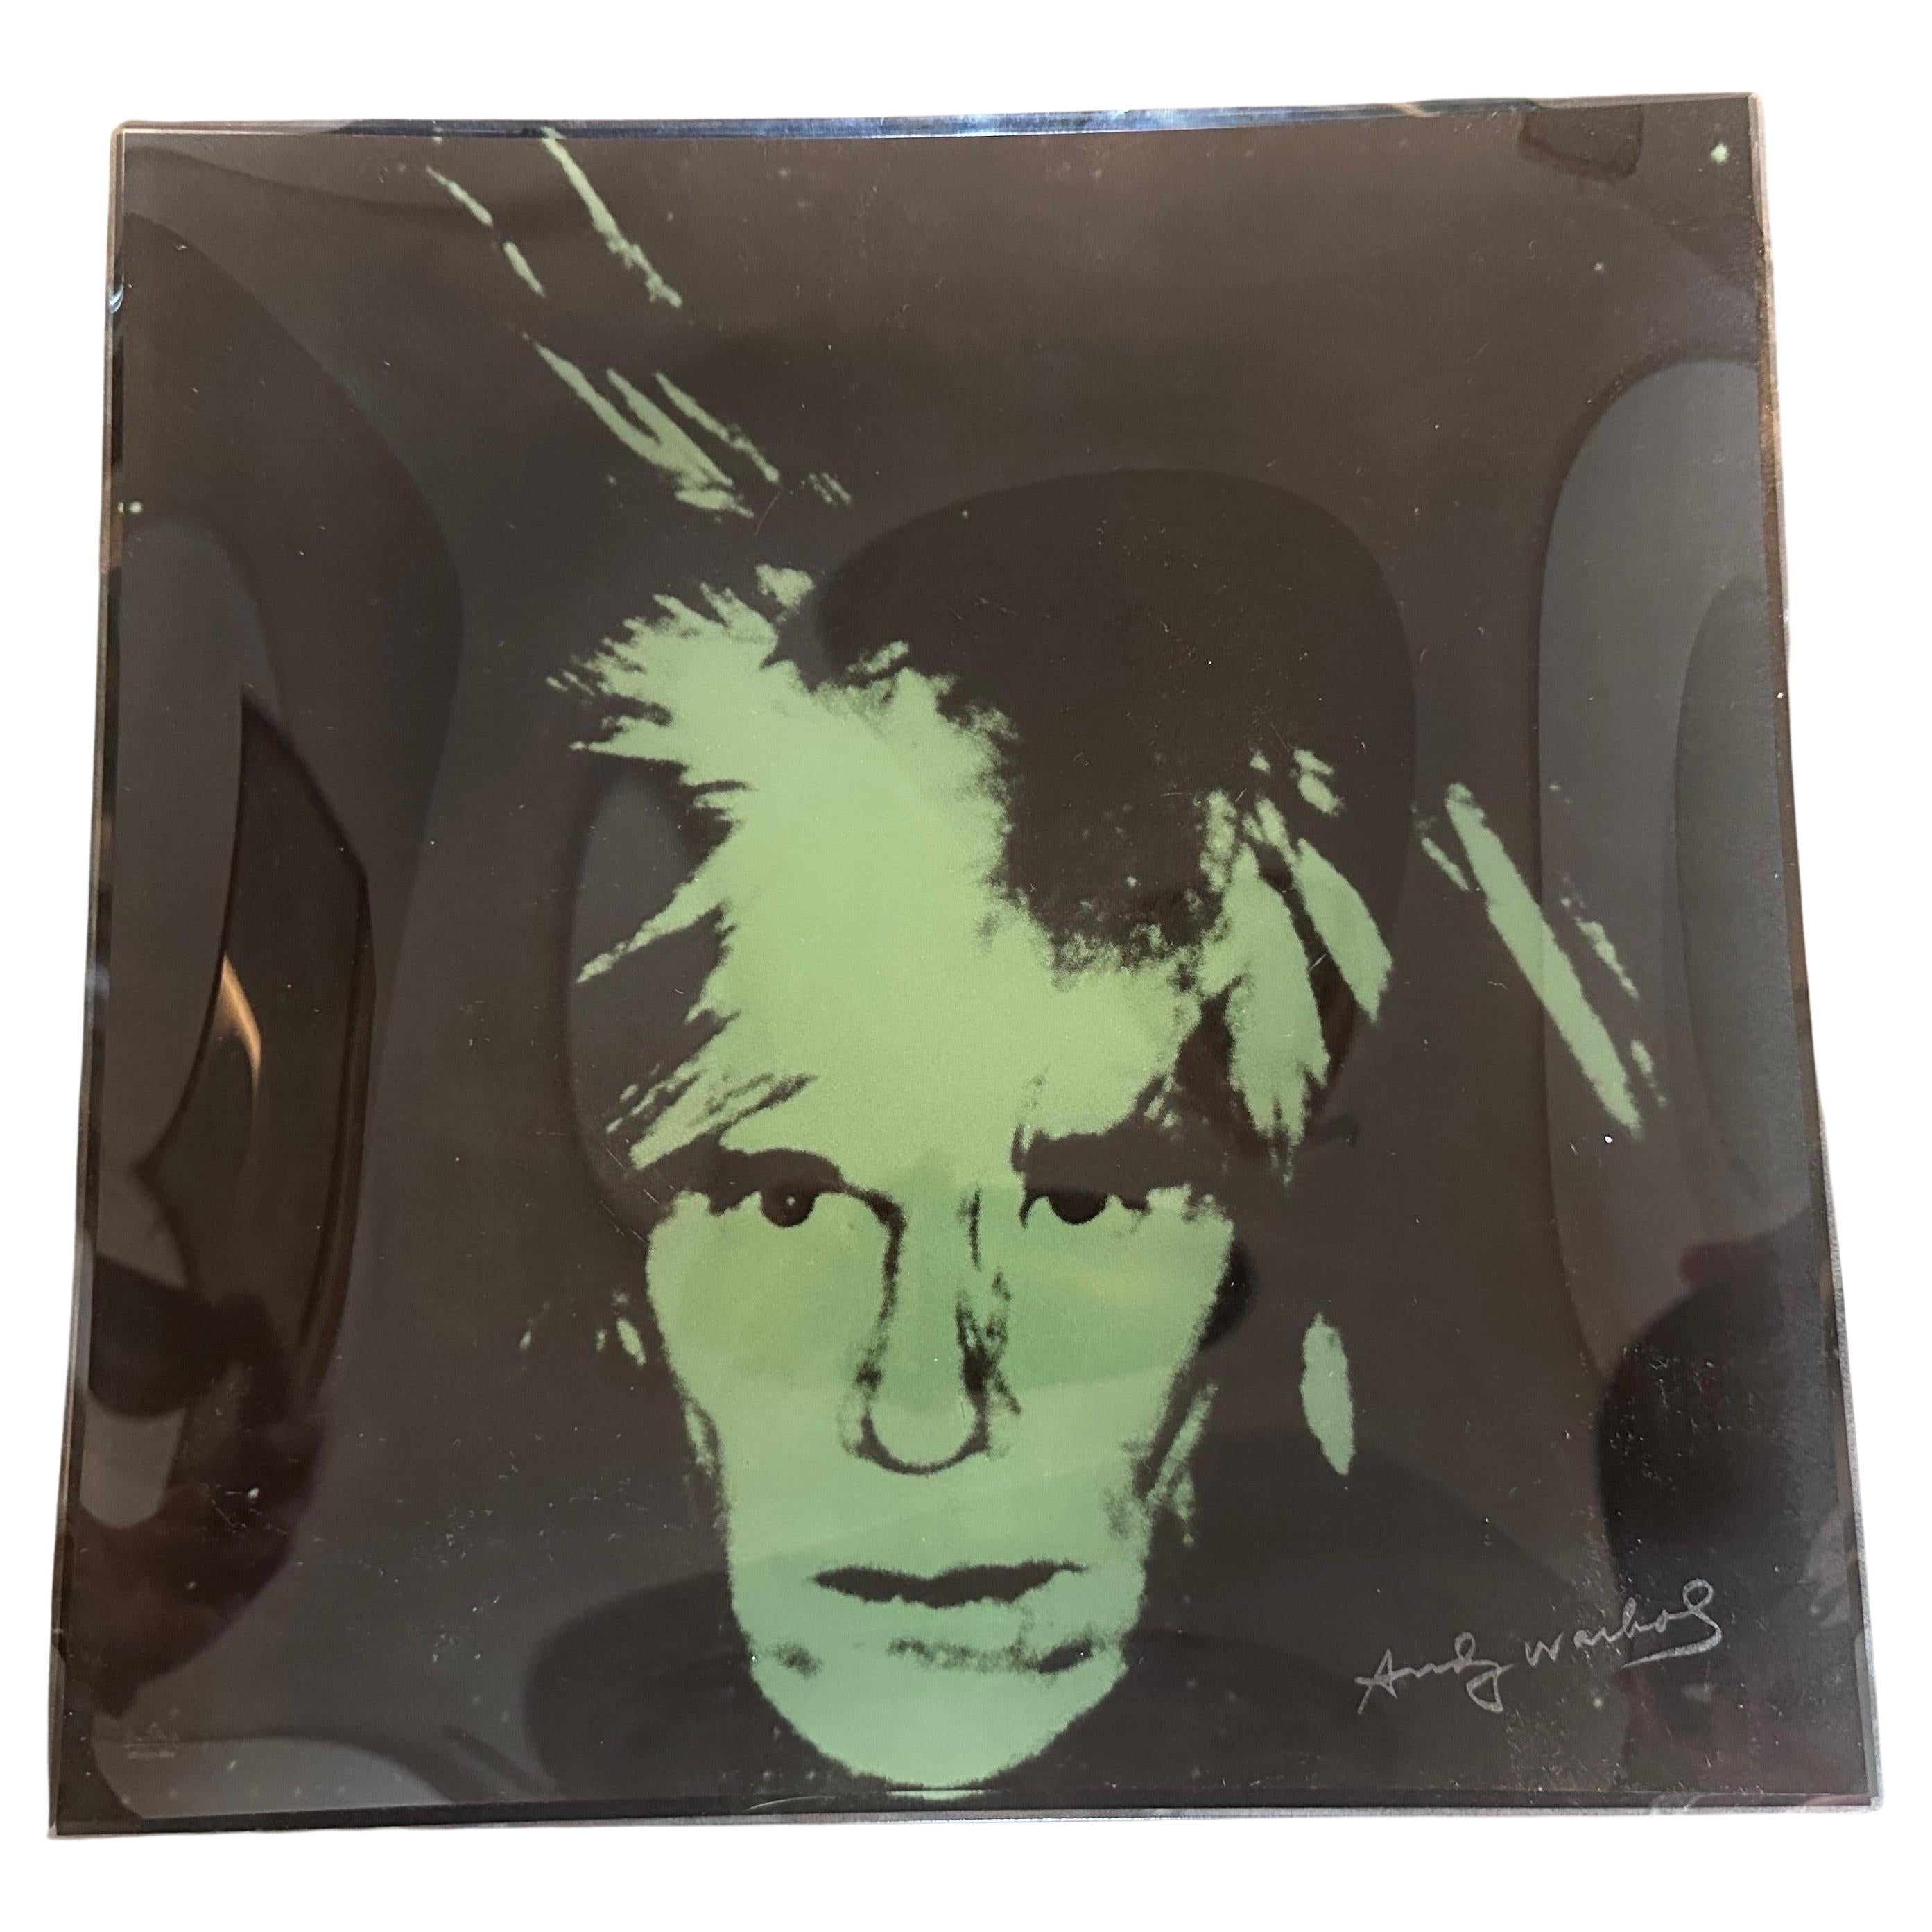 1990s Pop Art Andy Warhol Self Portrait Square Glass Tray by Rosenthal For Sale